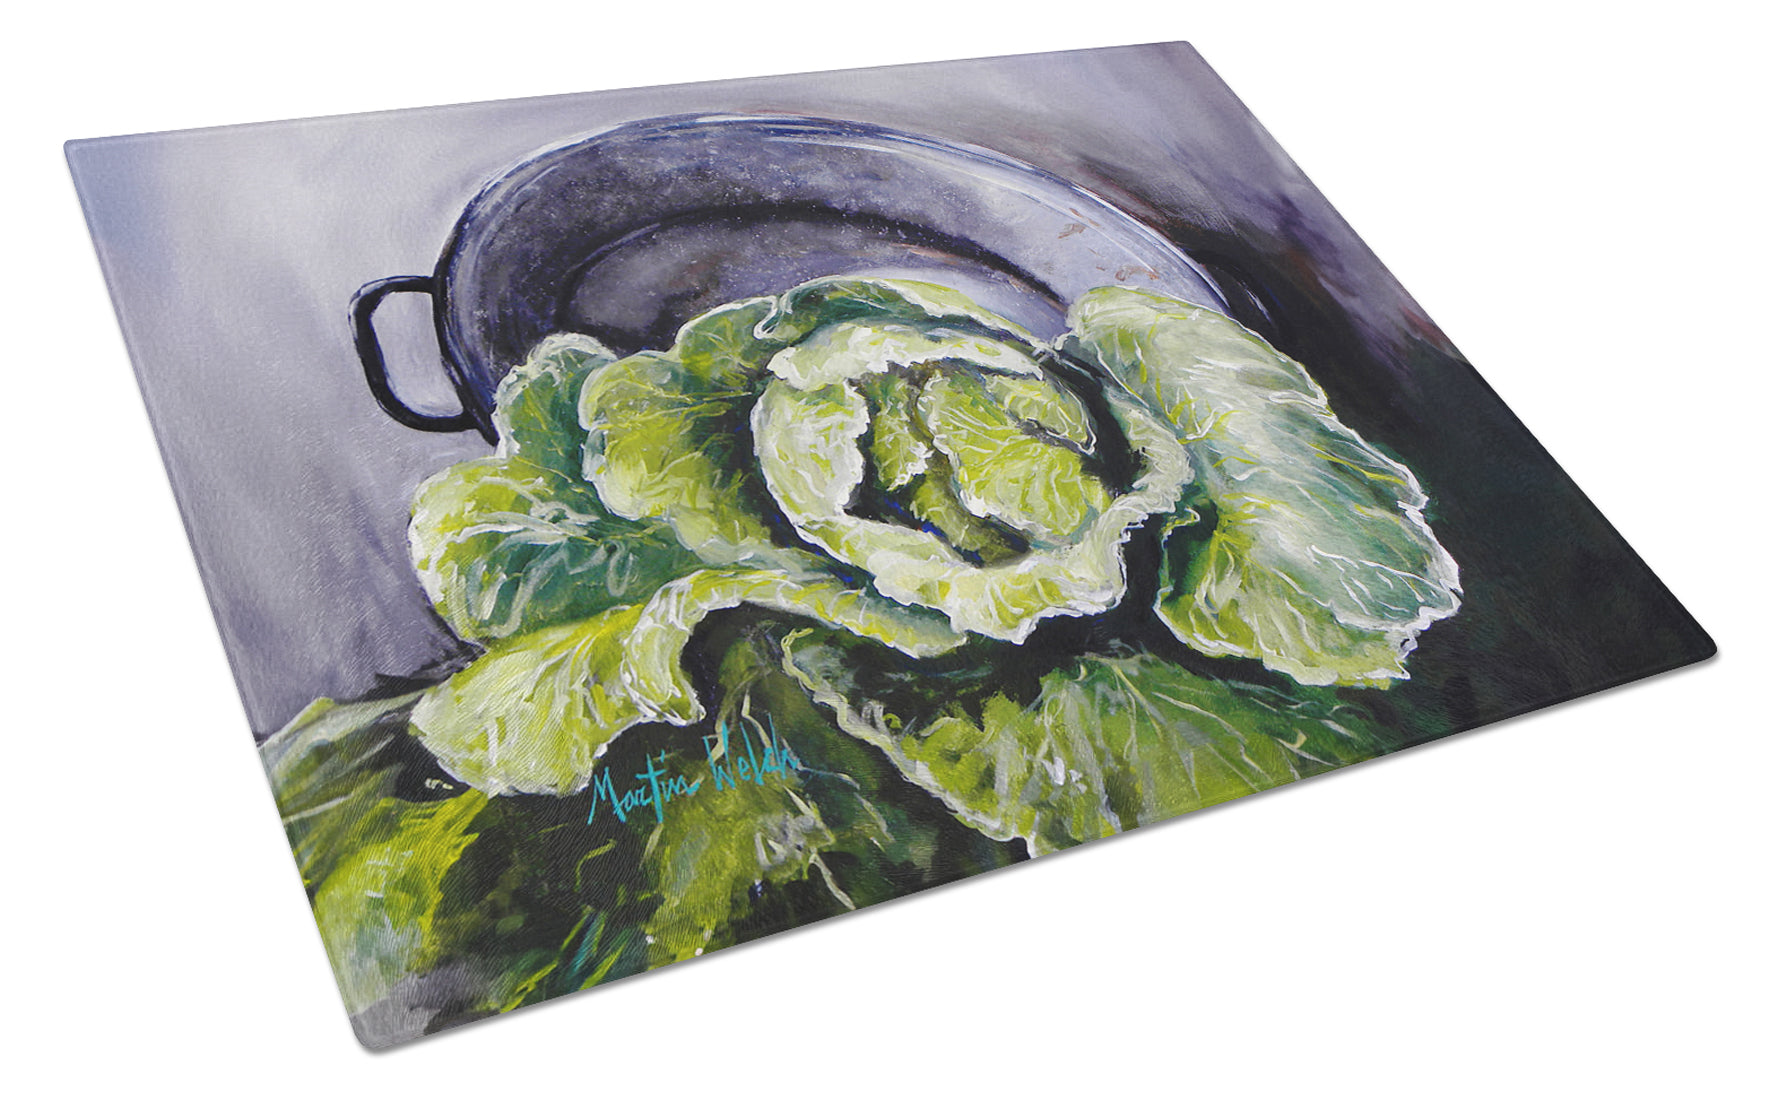 Buy this Home Grown In Plaquemines Parish Cabbage Glass Cutting Board